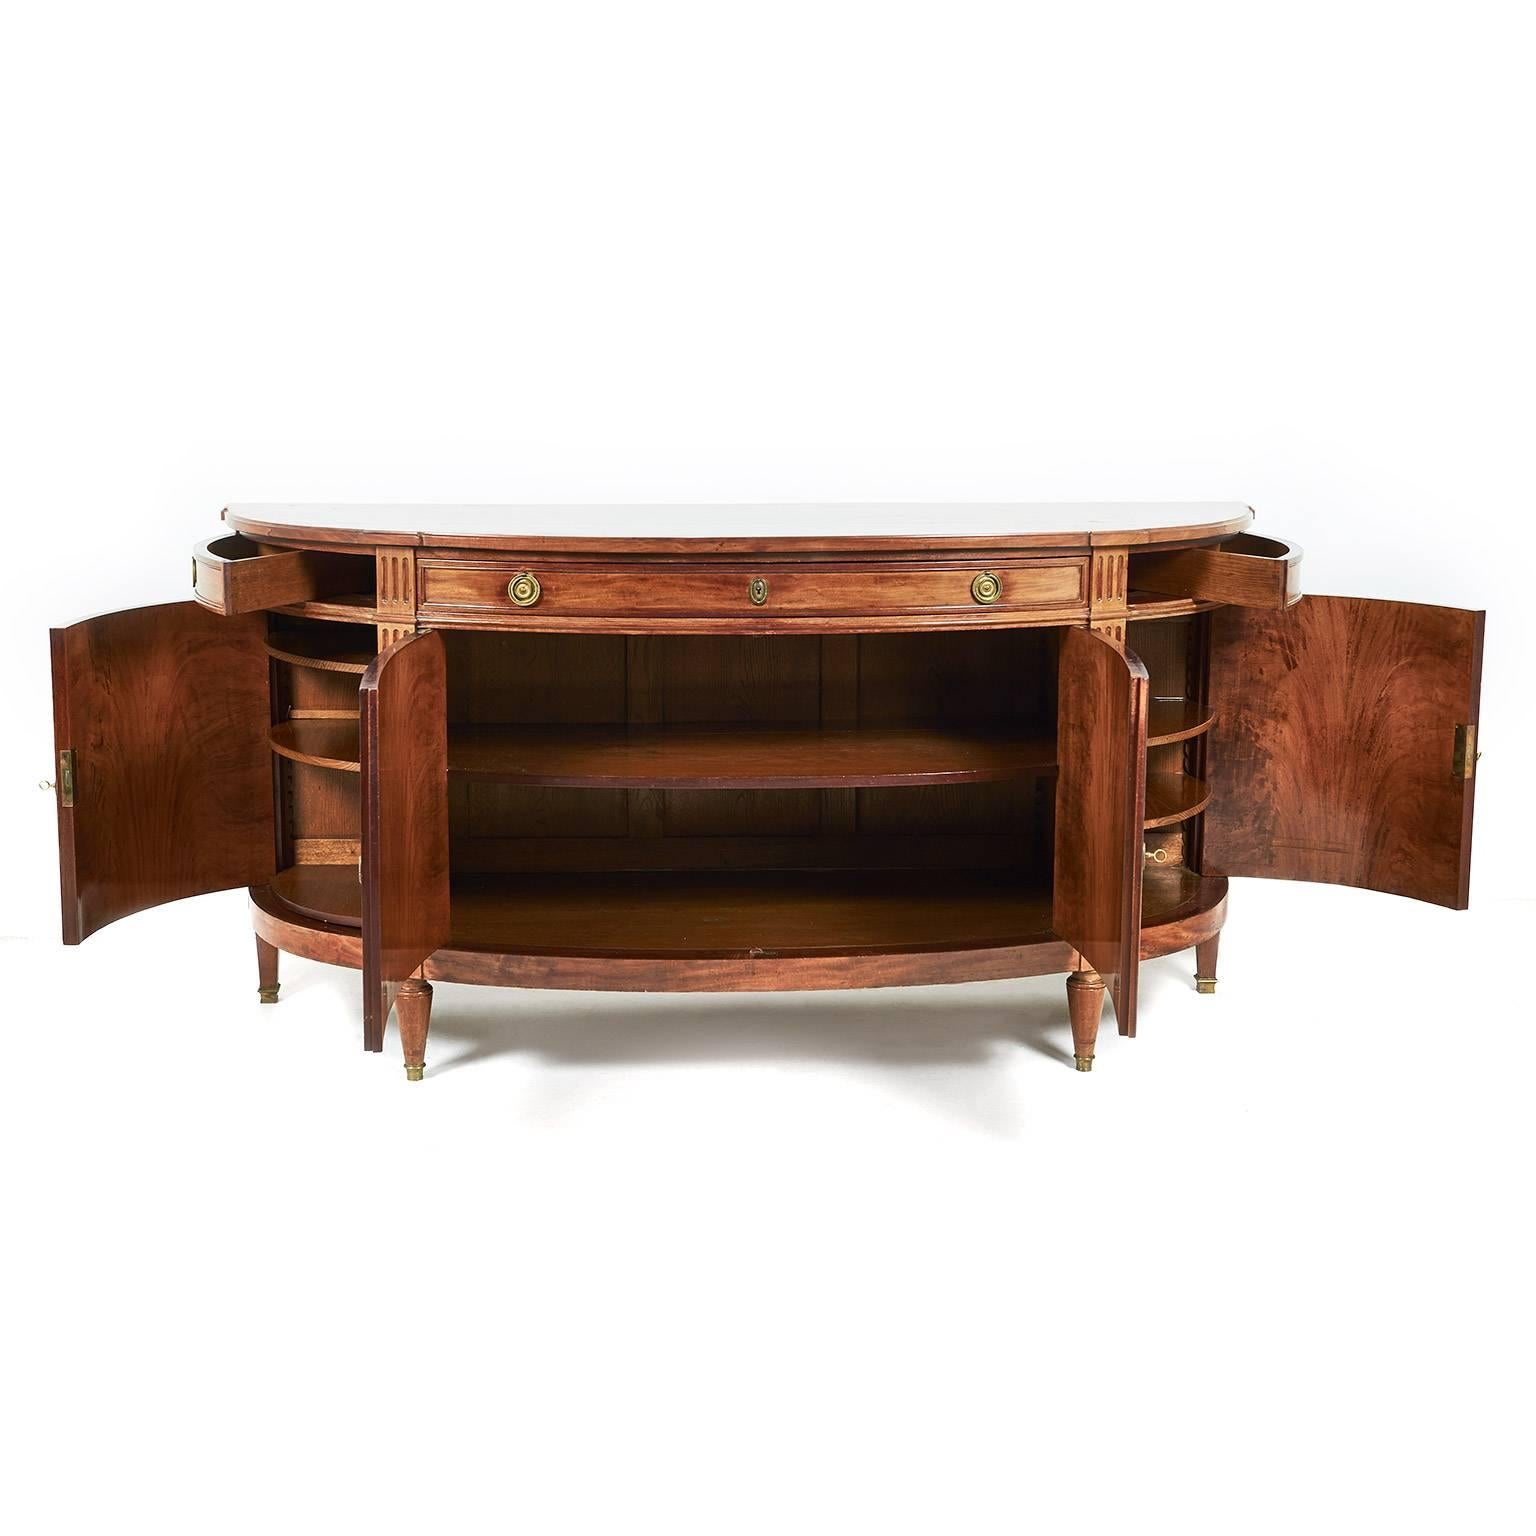 Sheraton Antique French Demilune Sideboard in Mahogany, FY-934